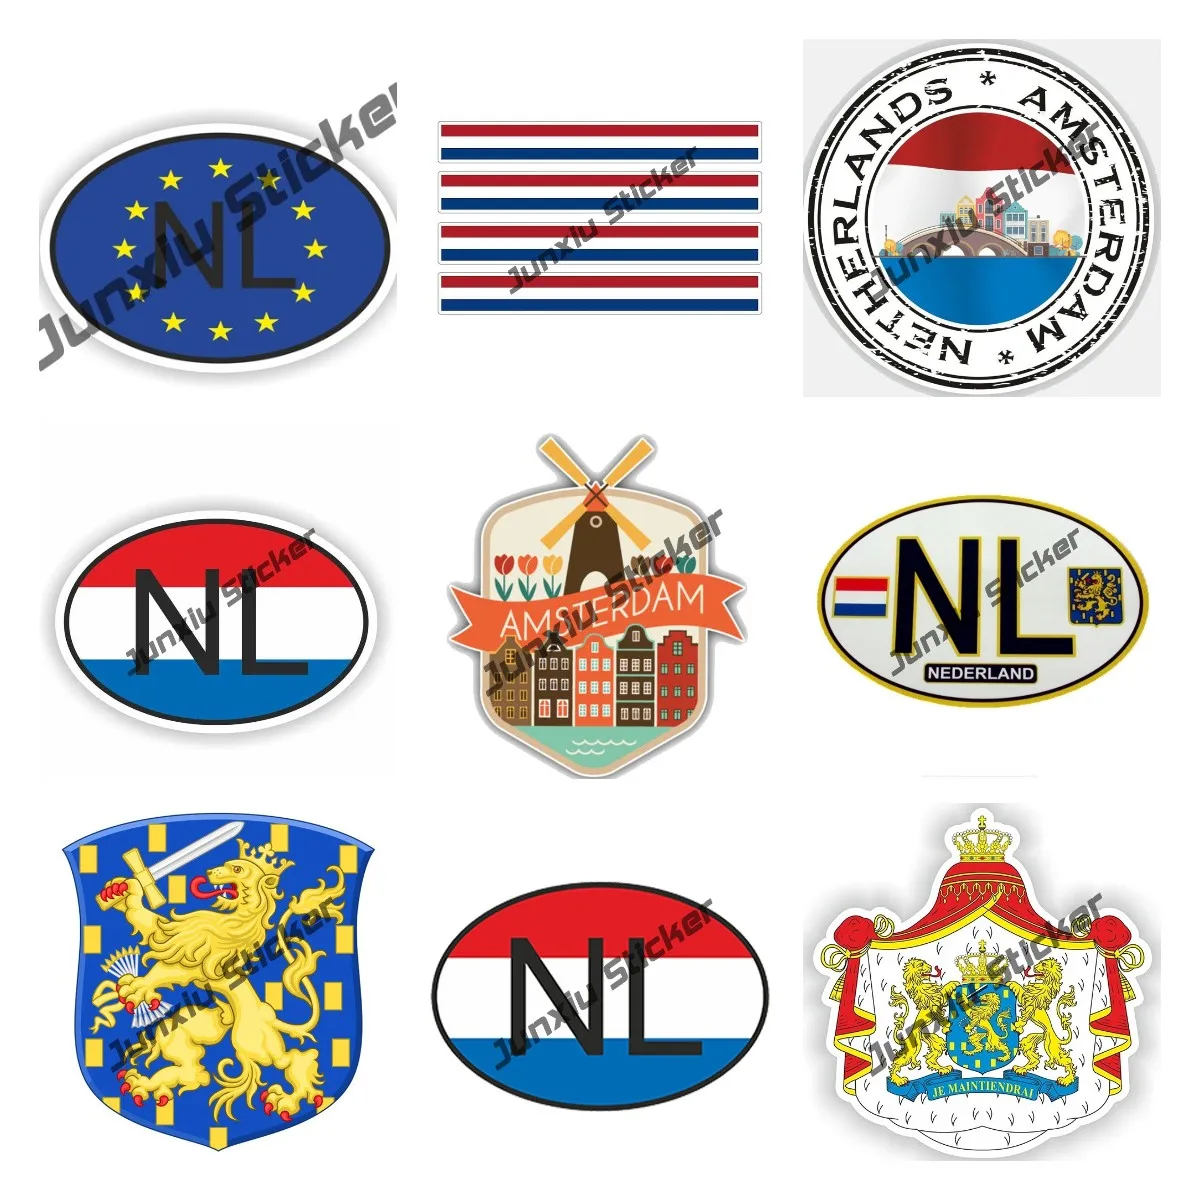 

Dutch Coat of Arms Sticker Decal Self Adhesive Vinyl Netherlands Flag NL EU Netherlands Country Code Sticker Car Accessories